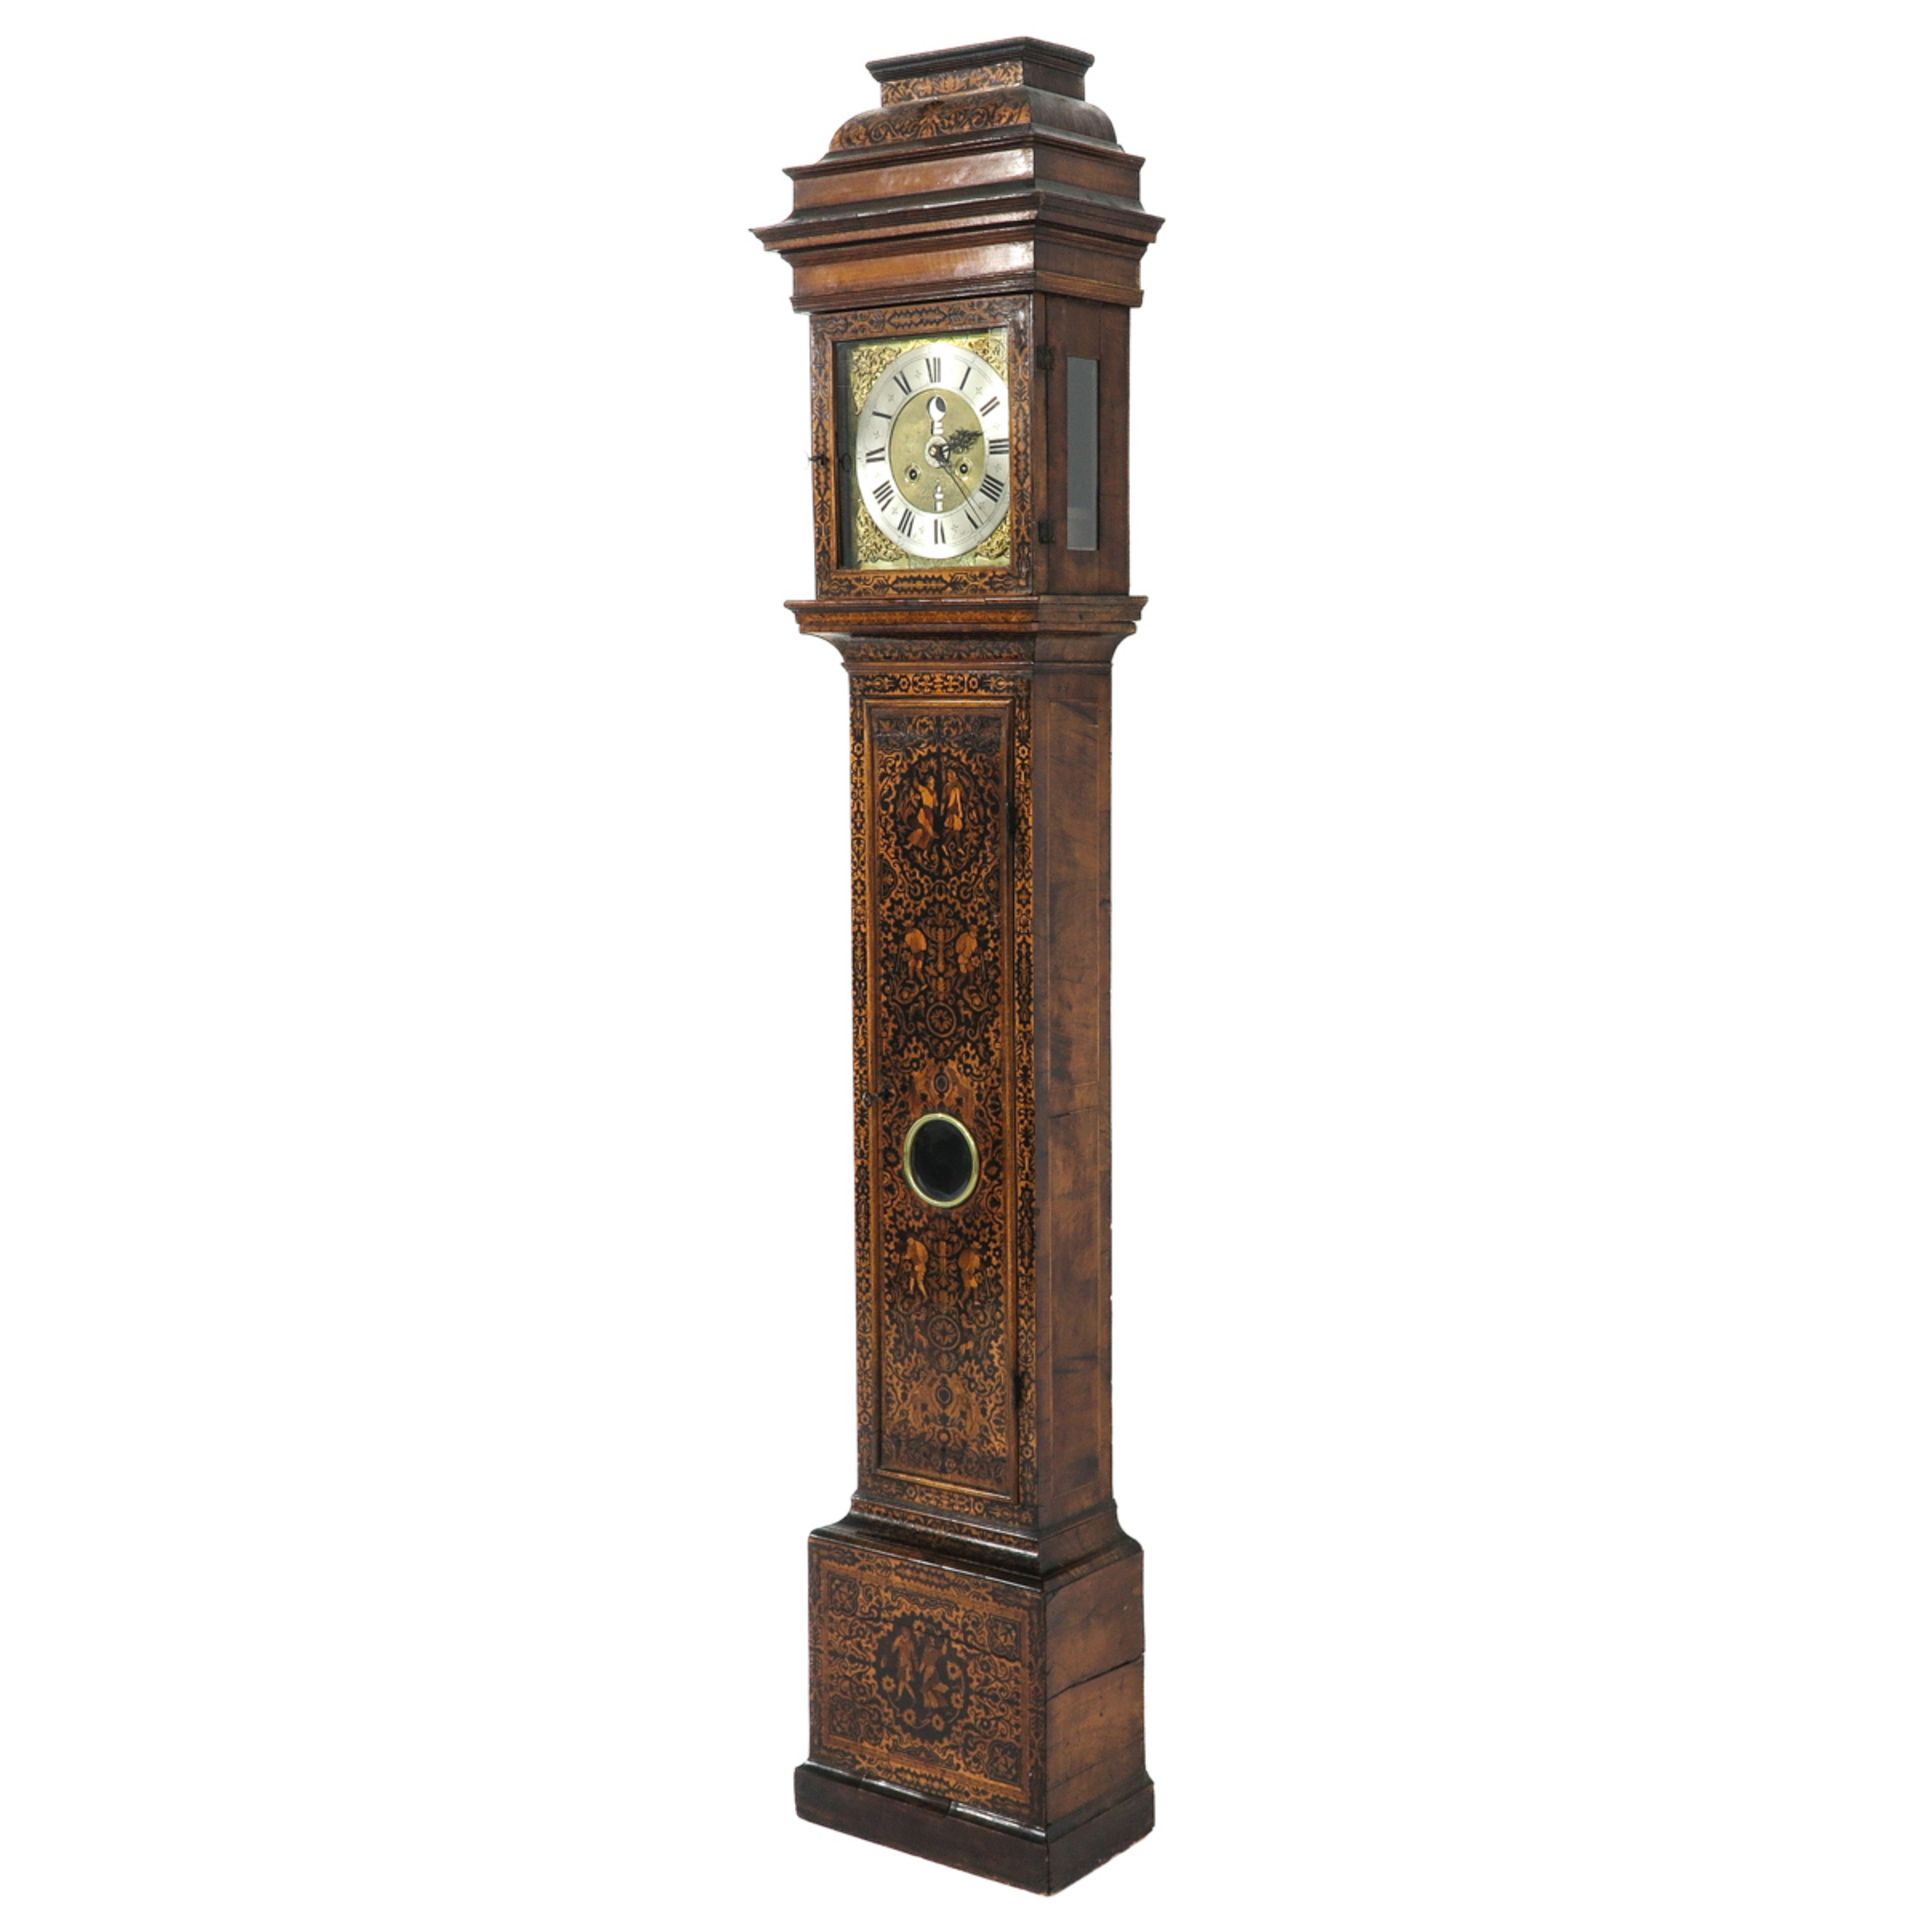 An 18th Century Amsterdam Standing Clock Signed S. Landre - Image 3 of 10